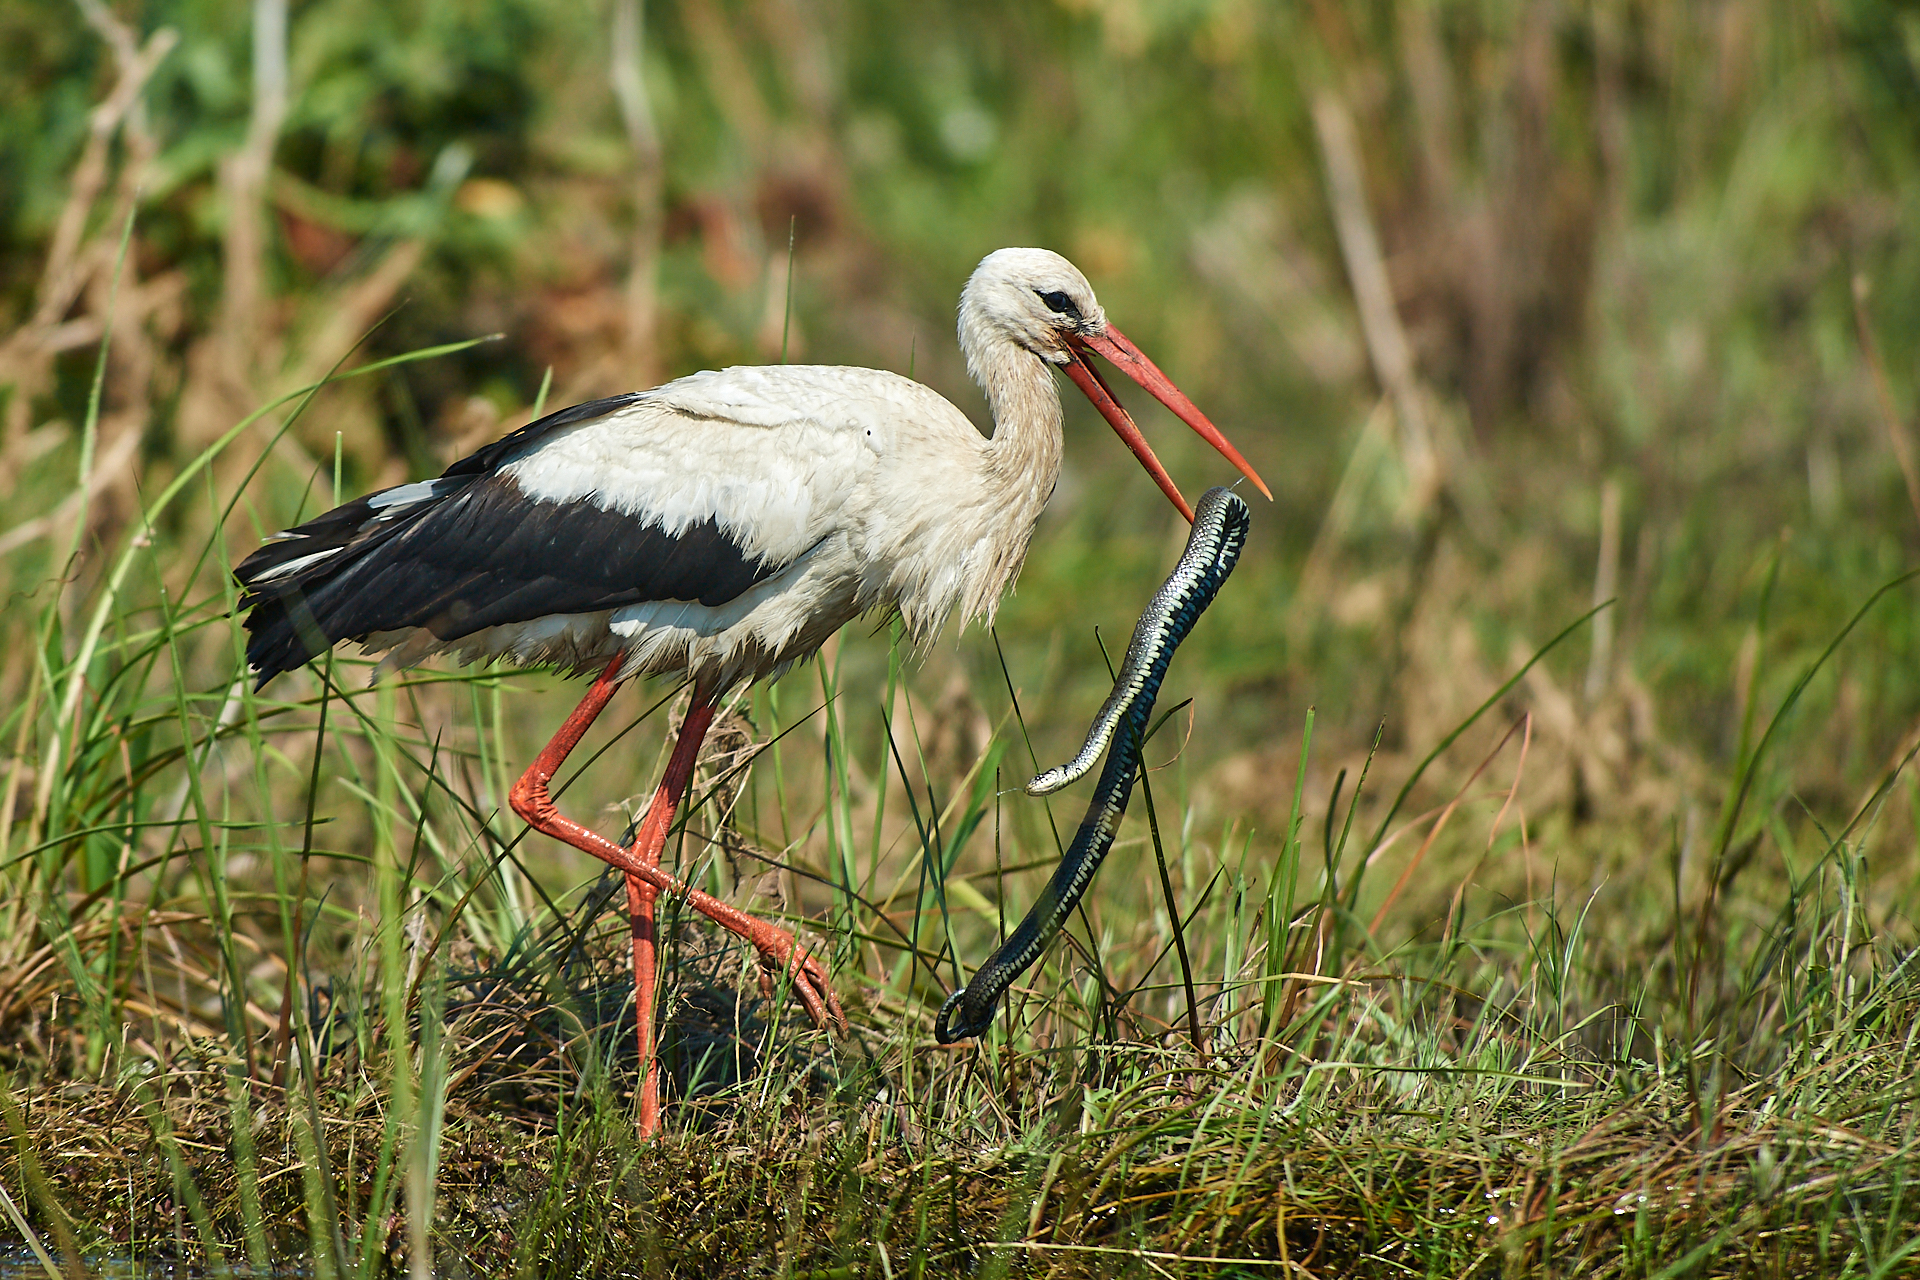 The stork and the natrice...